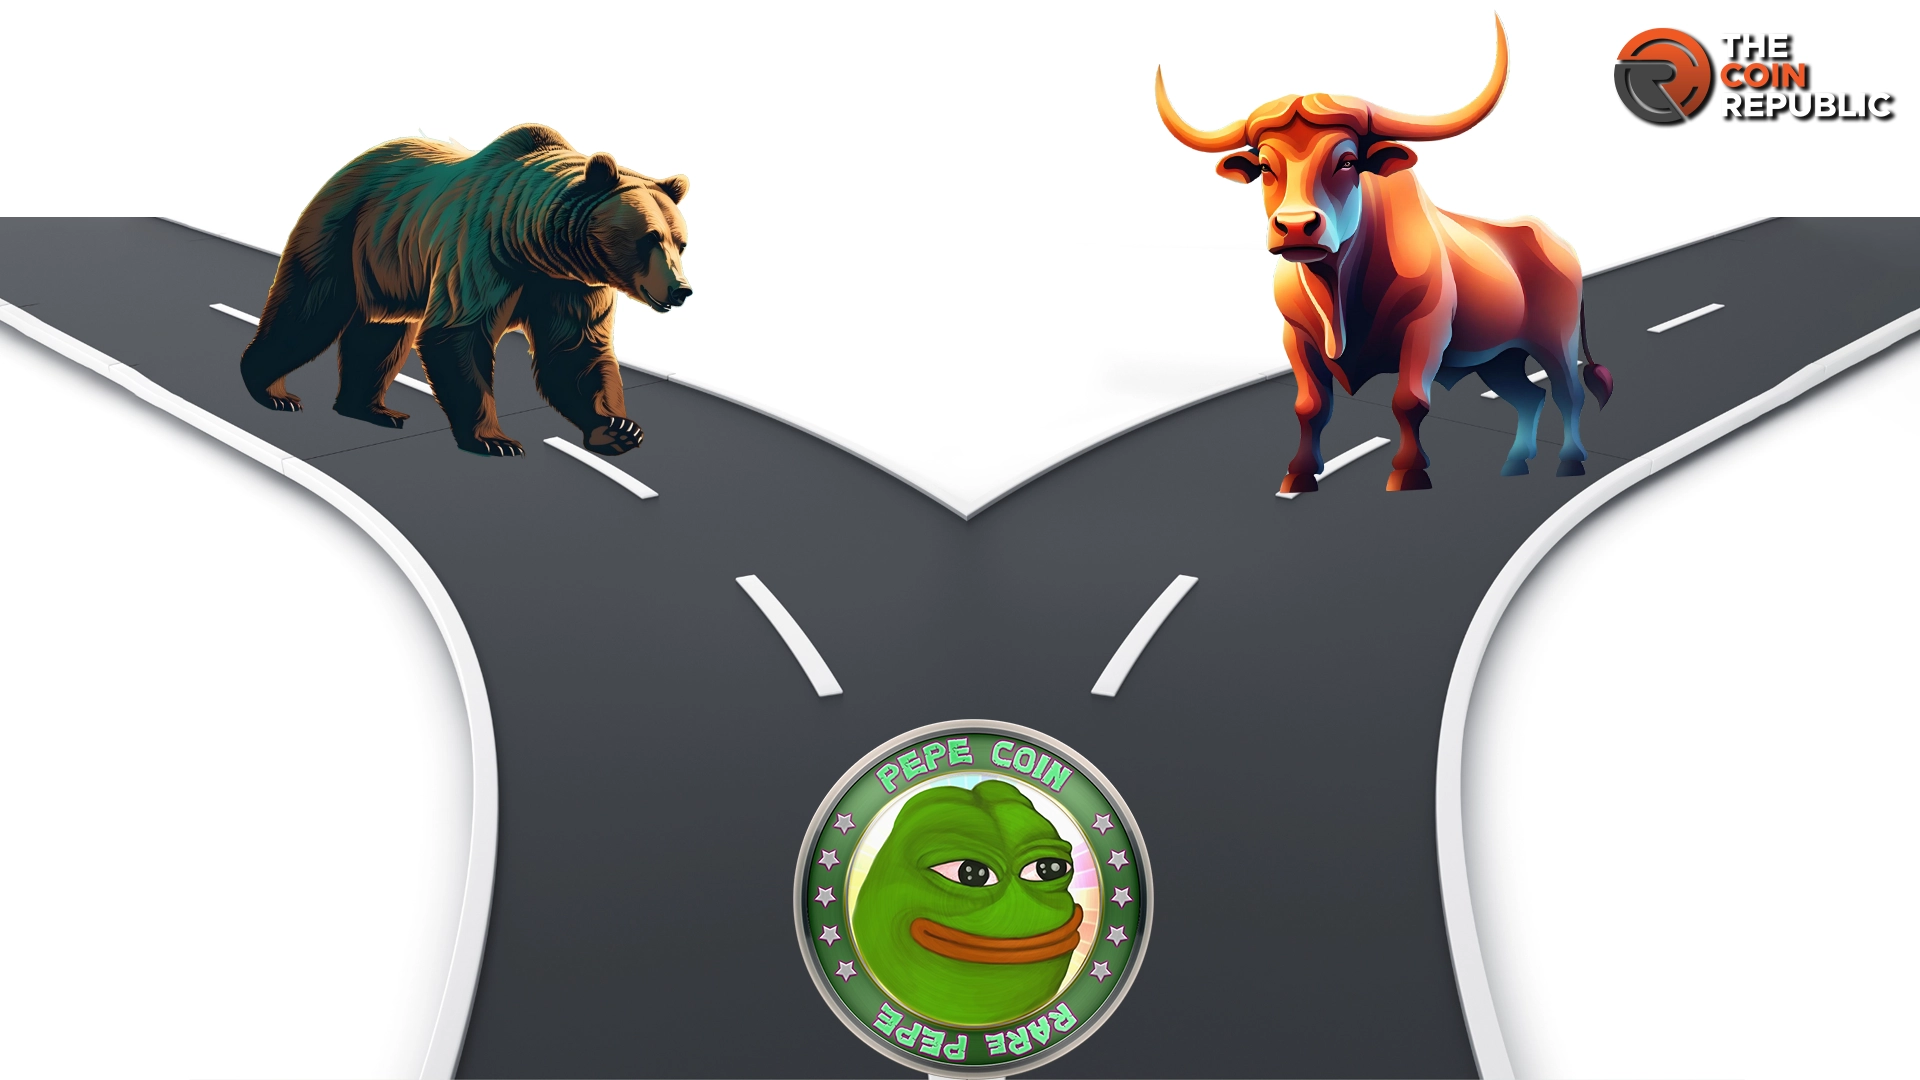 PEPE Price Prediction: Is the PEPE Memecoin Poised to Outperform?